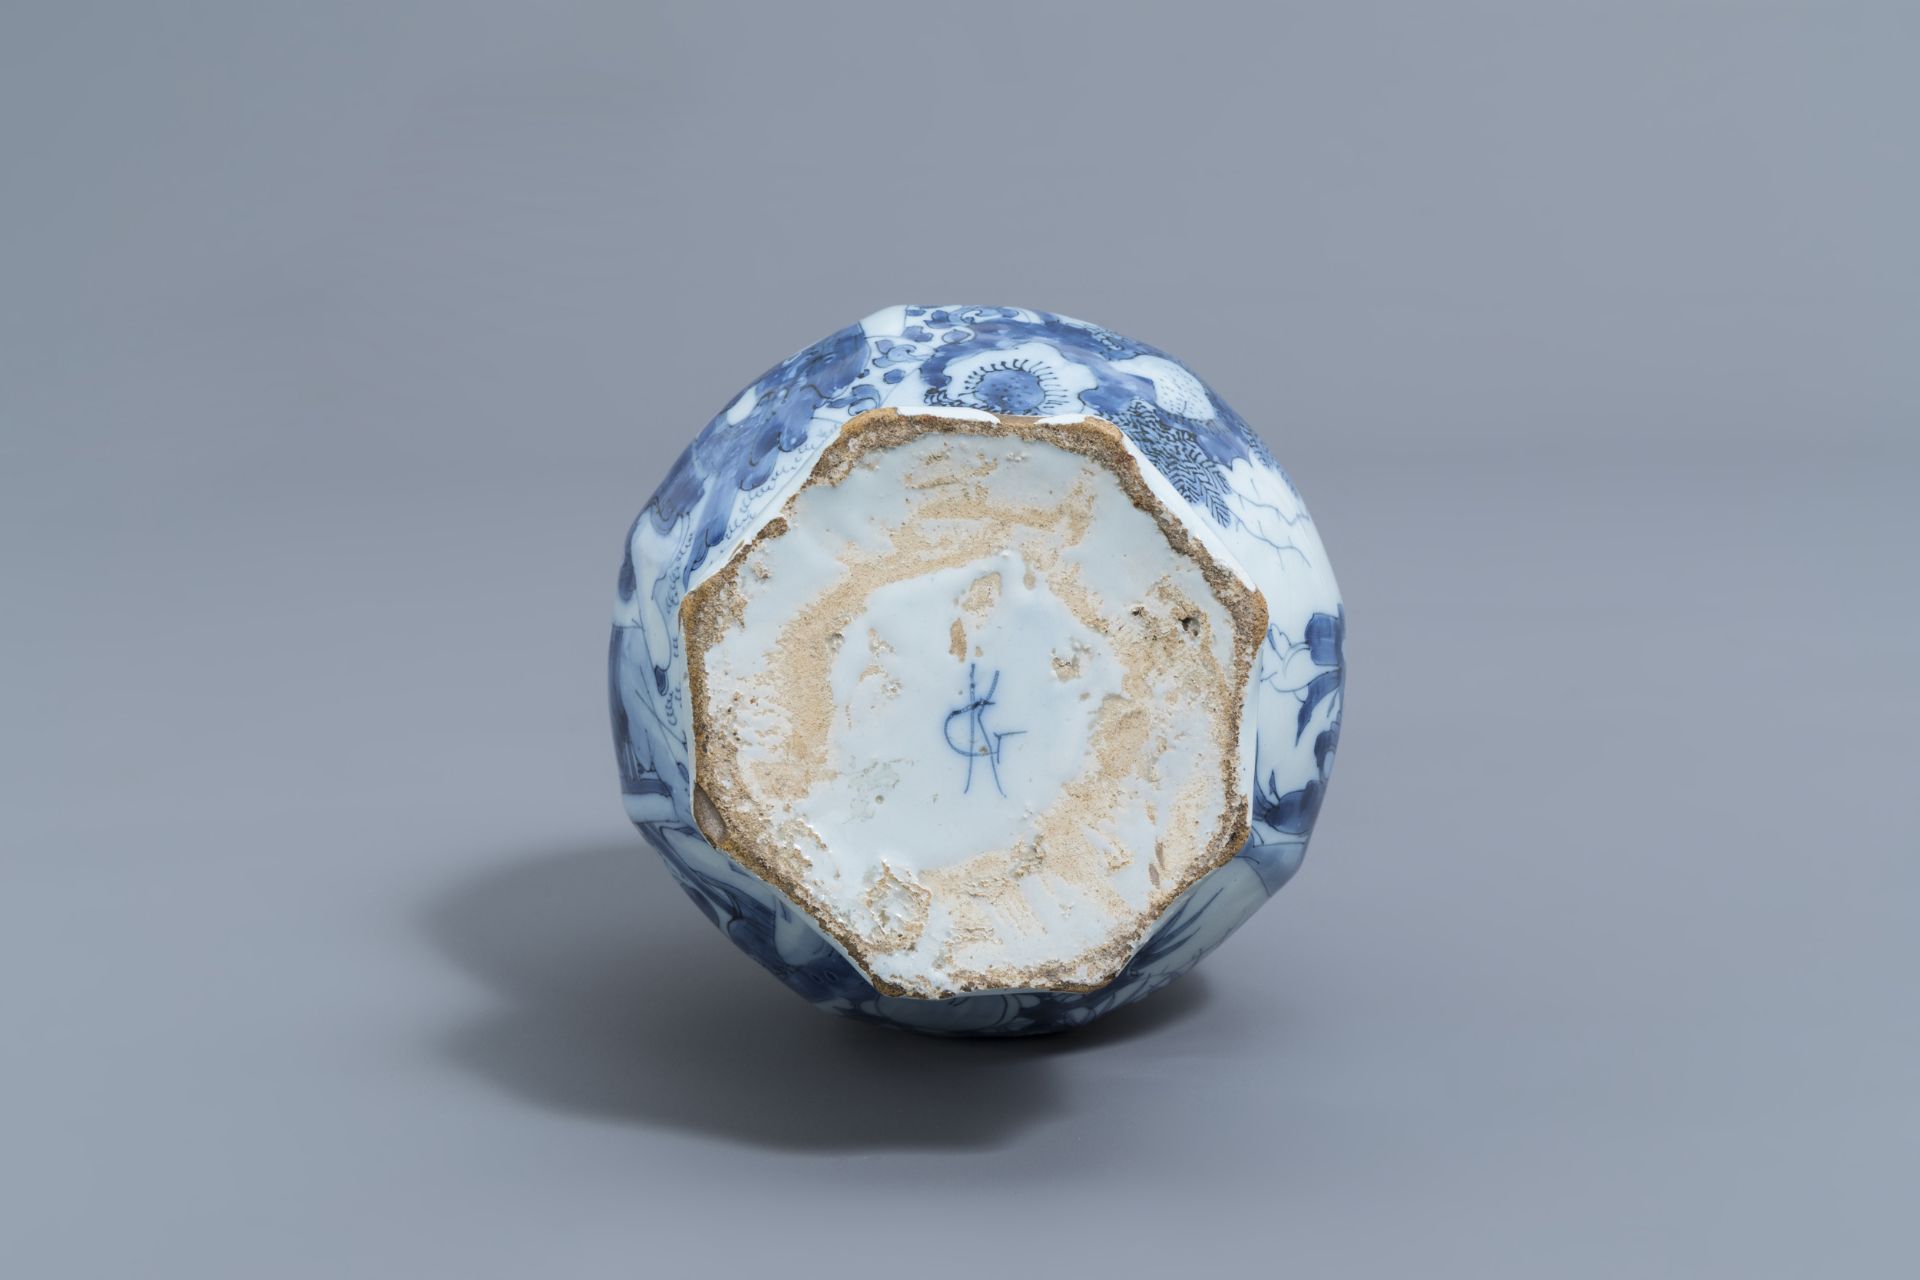 A Dutch Delft blue and white 'chinoiserie' garlic neck bottle vase, late 17th C. - Image 6 of 6